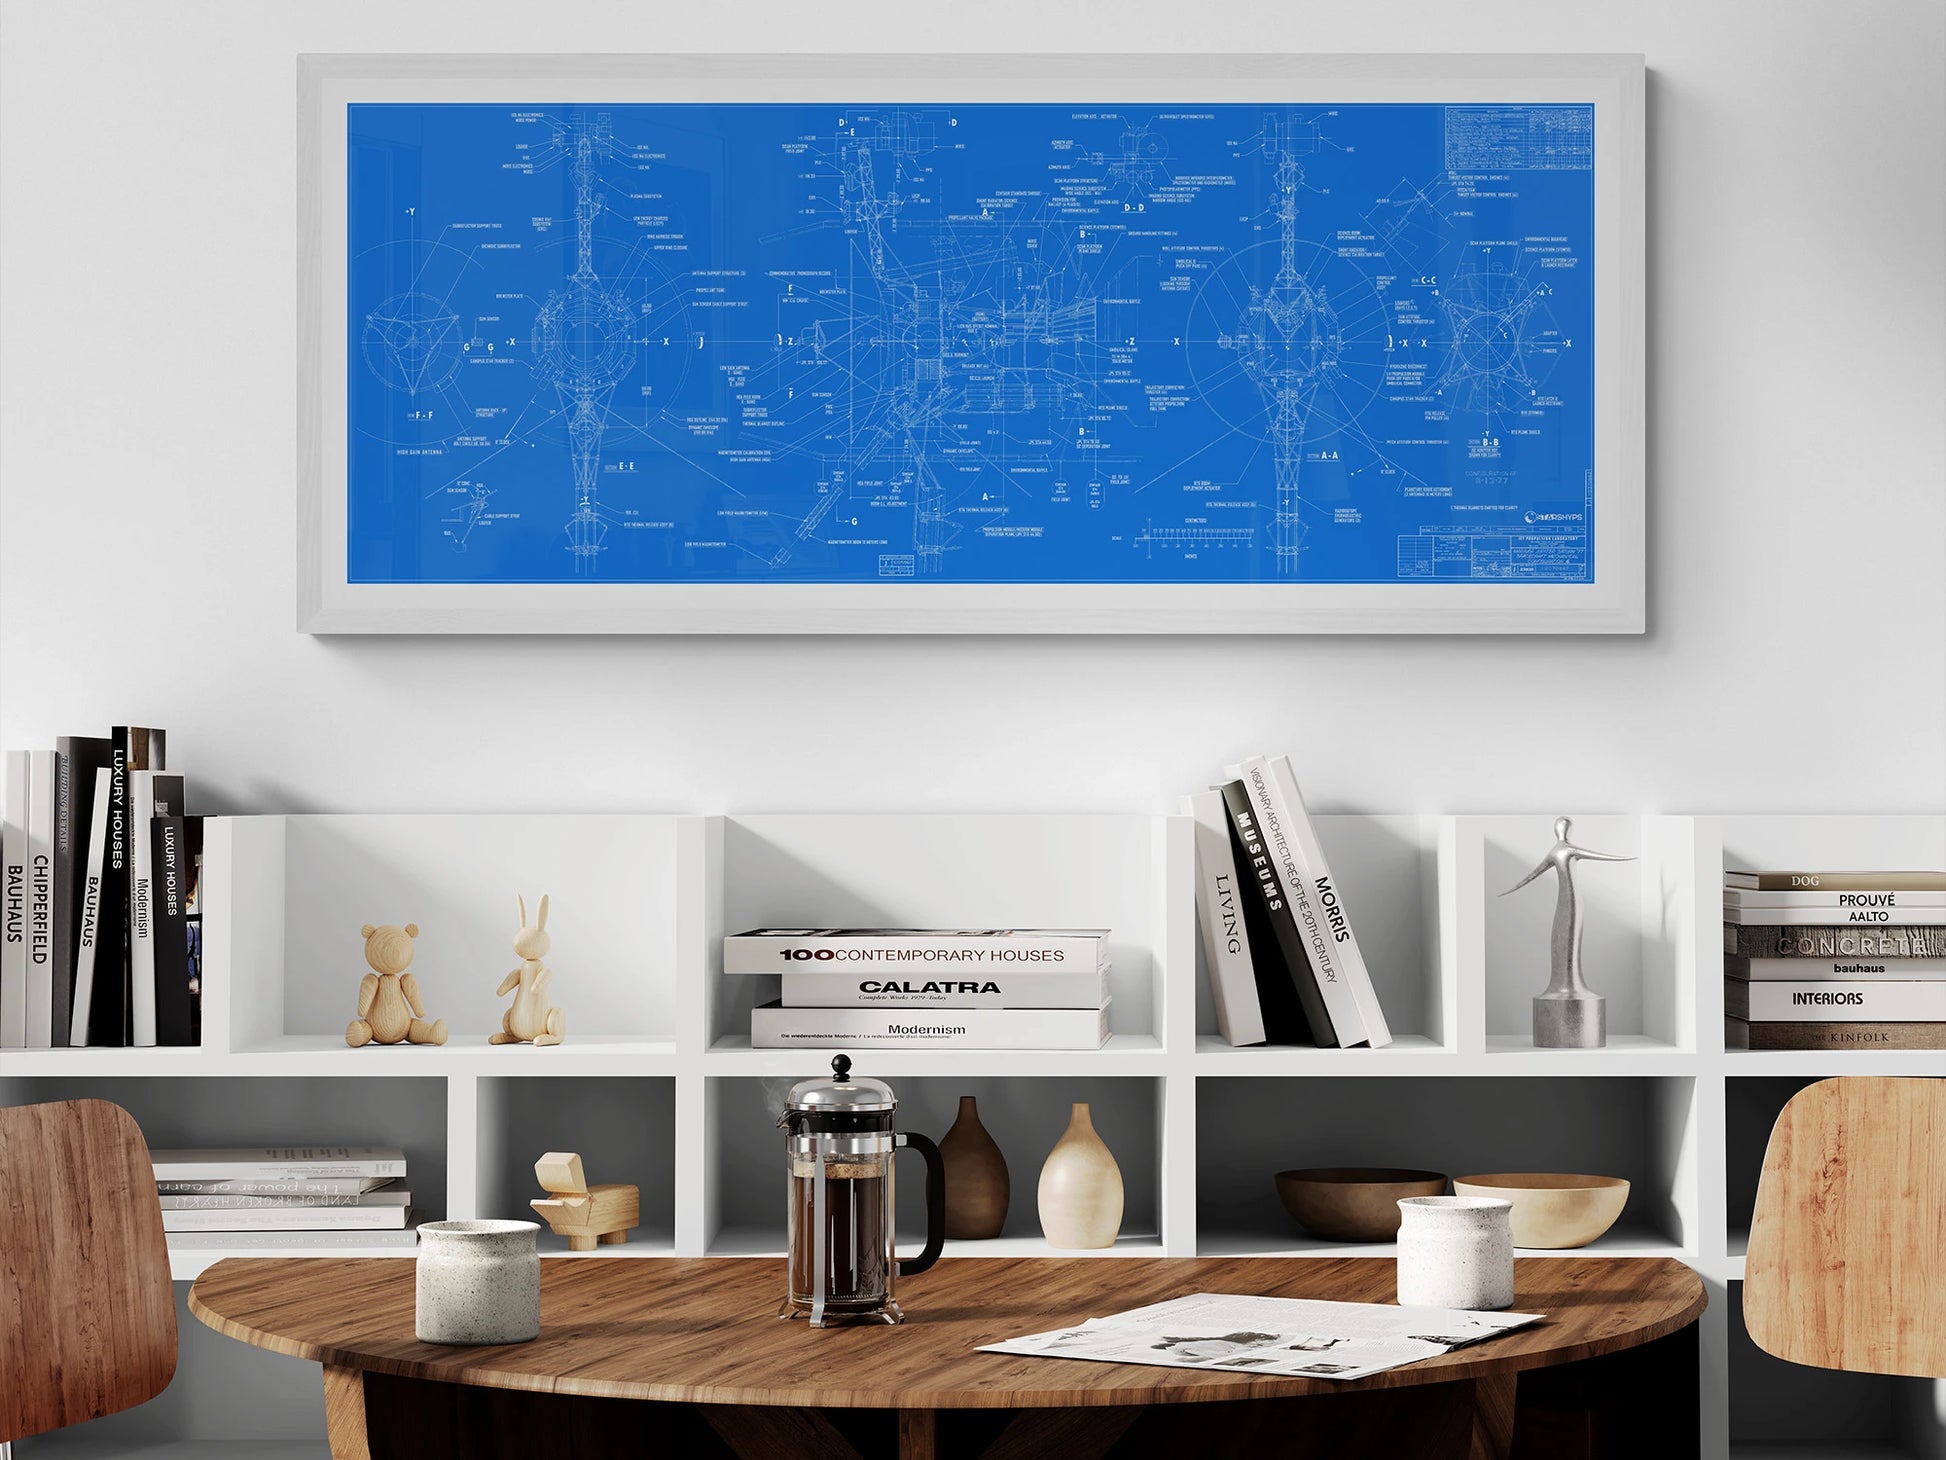 Voyager Space Probes Blueprint | Rocket Blueprint Posters | NASA | JPL | A cozy dining setup featuring a wooden table, coffee maker, and a white bookshelf. A large framed blue blueprint of the Voyager Probes, detailed with white technical sketches, is displayed above the bookshelf.